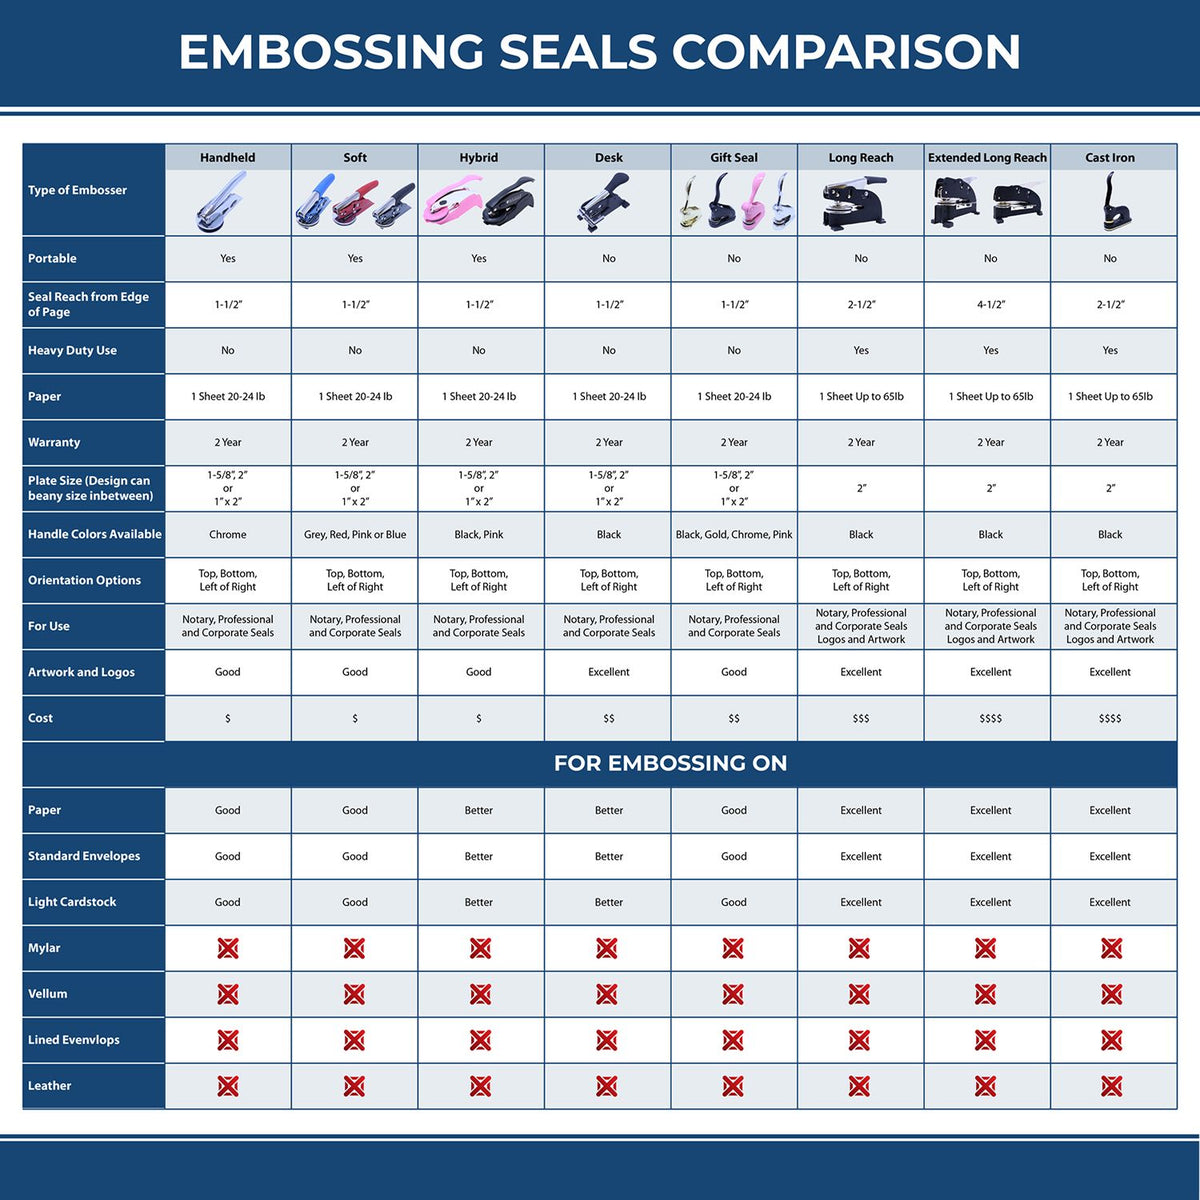 A comparison chart for the different types of mount models available for the Heavy Duty Cast Iron New Mexico Engineer Seal Embosser.